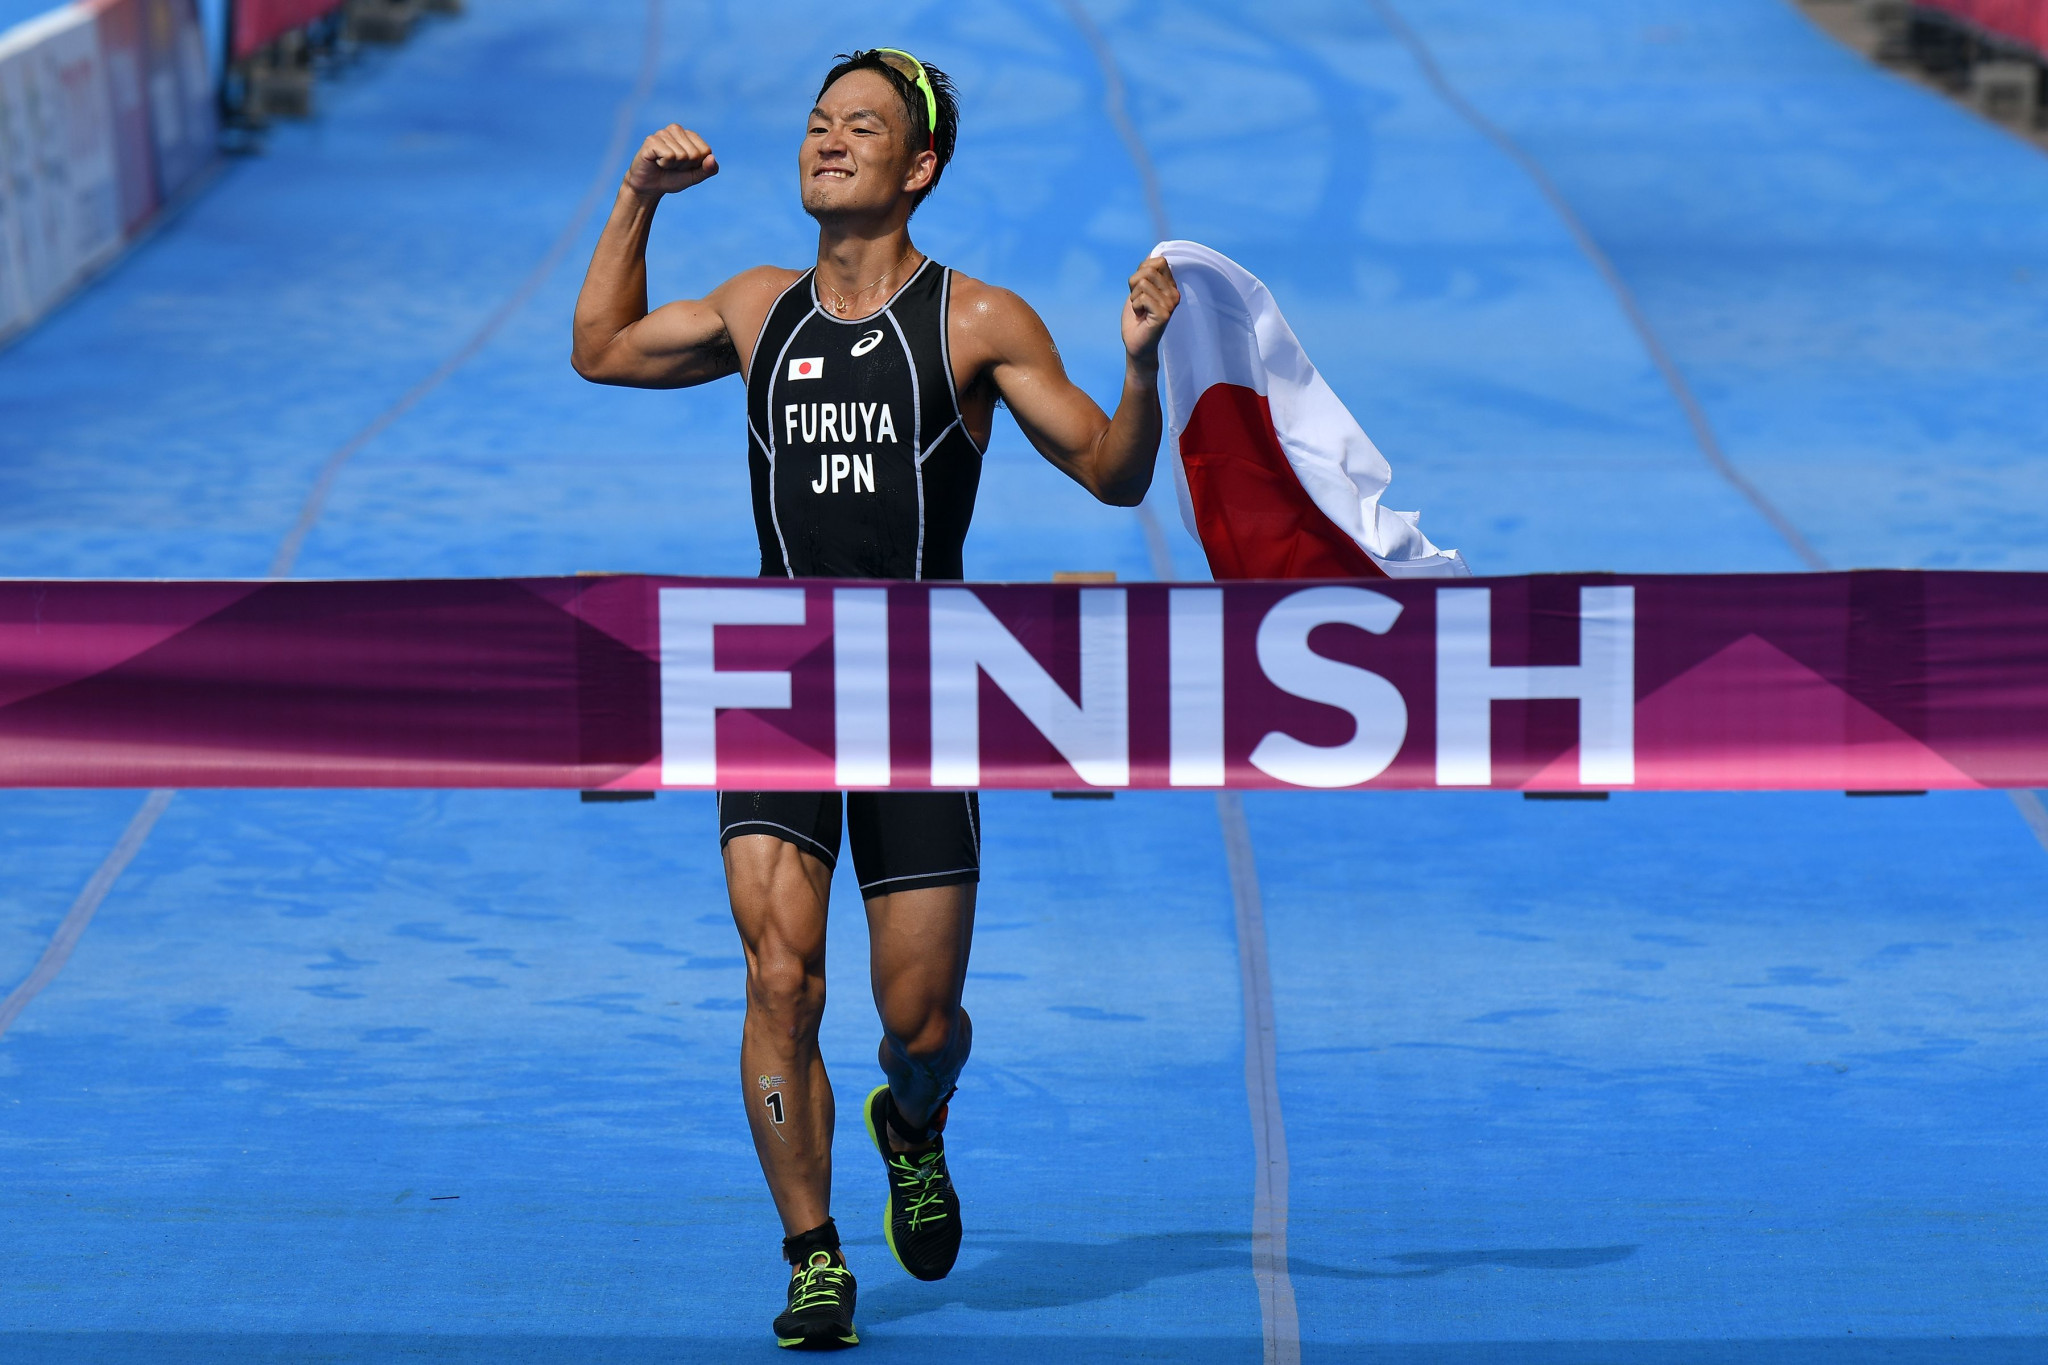 The day started with victory for Japan's Jumpei Furuya in the men's triathlon ©Getty Images